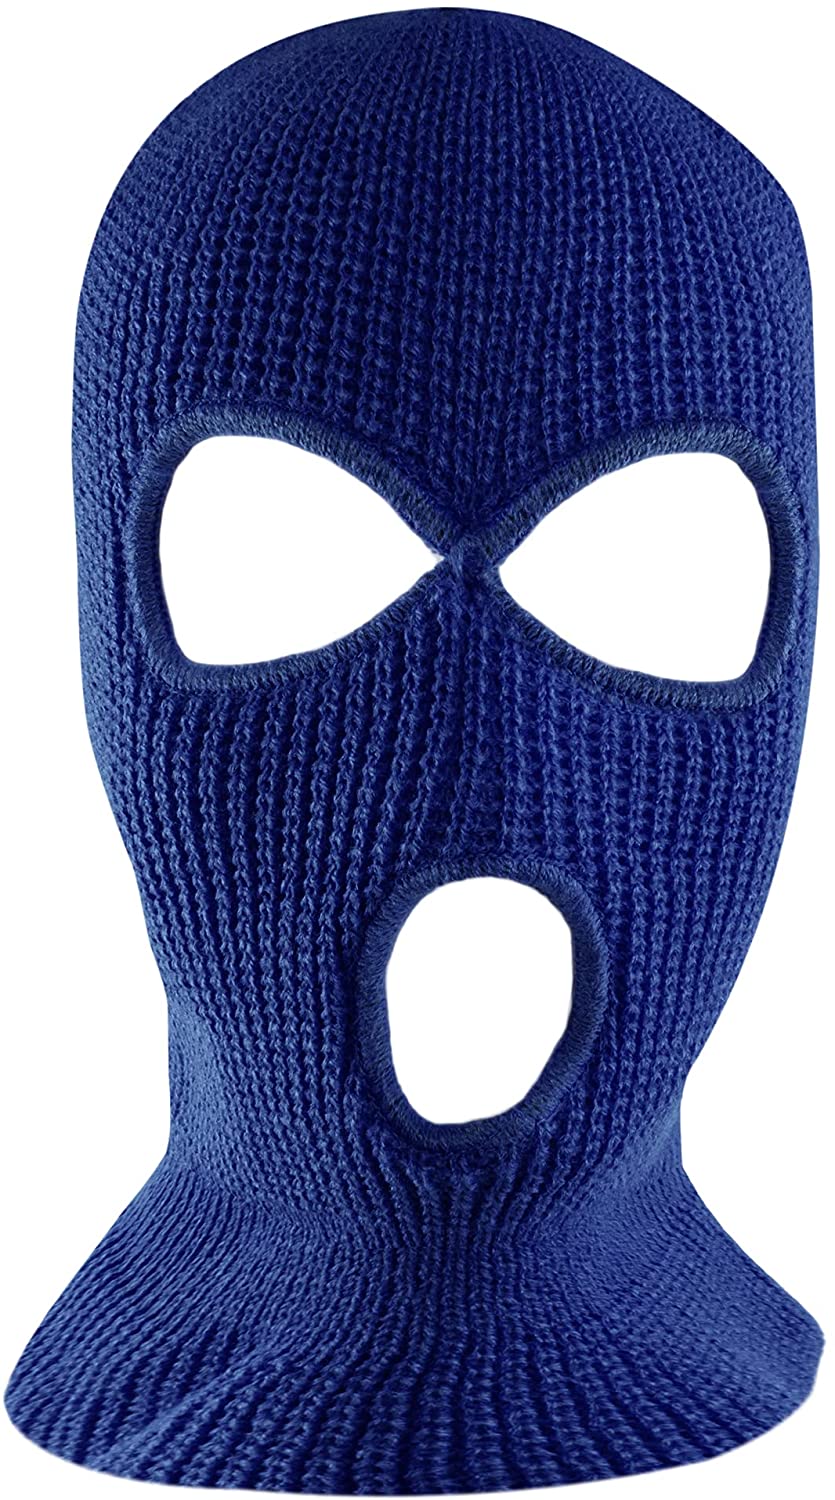 Knit Sew Acrylic Outdoor Full Face Cover Thermal Ski Mask by Super Z Outlet